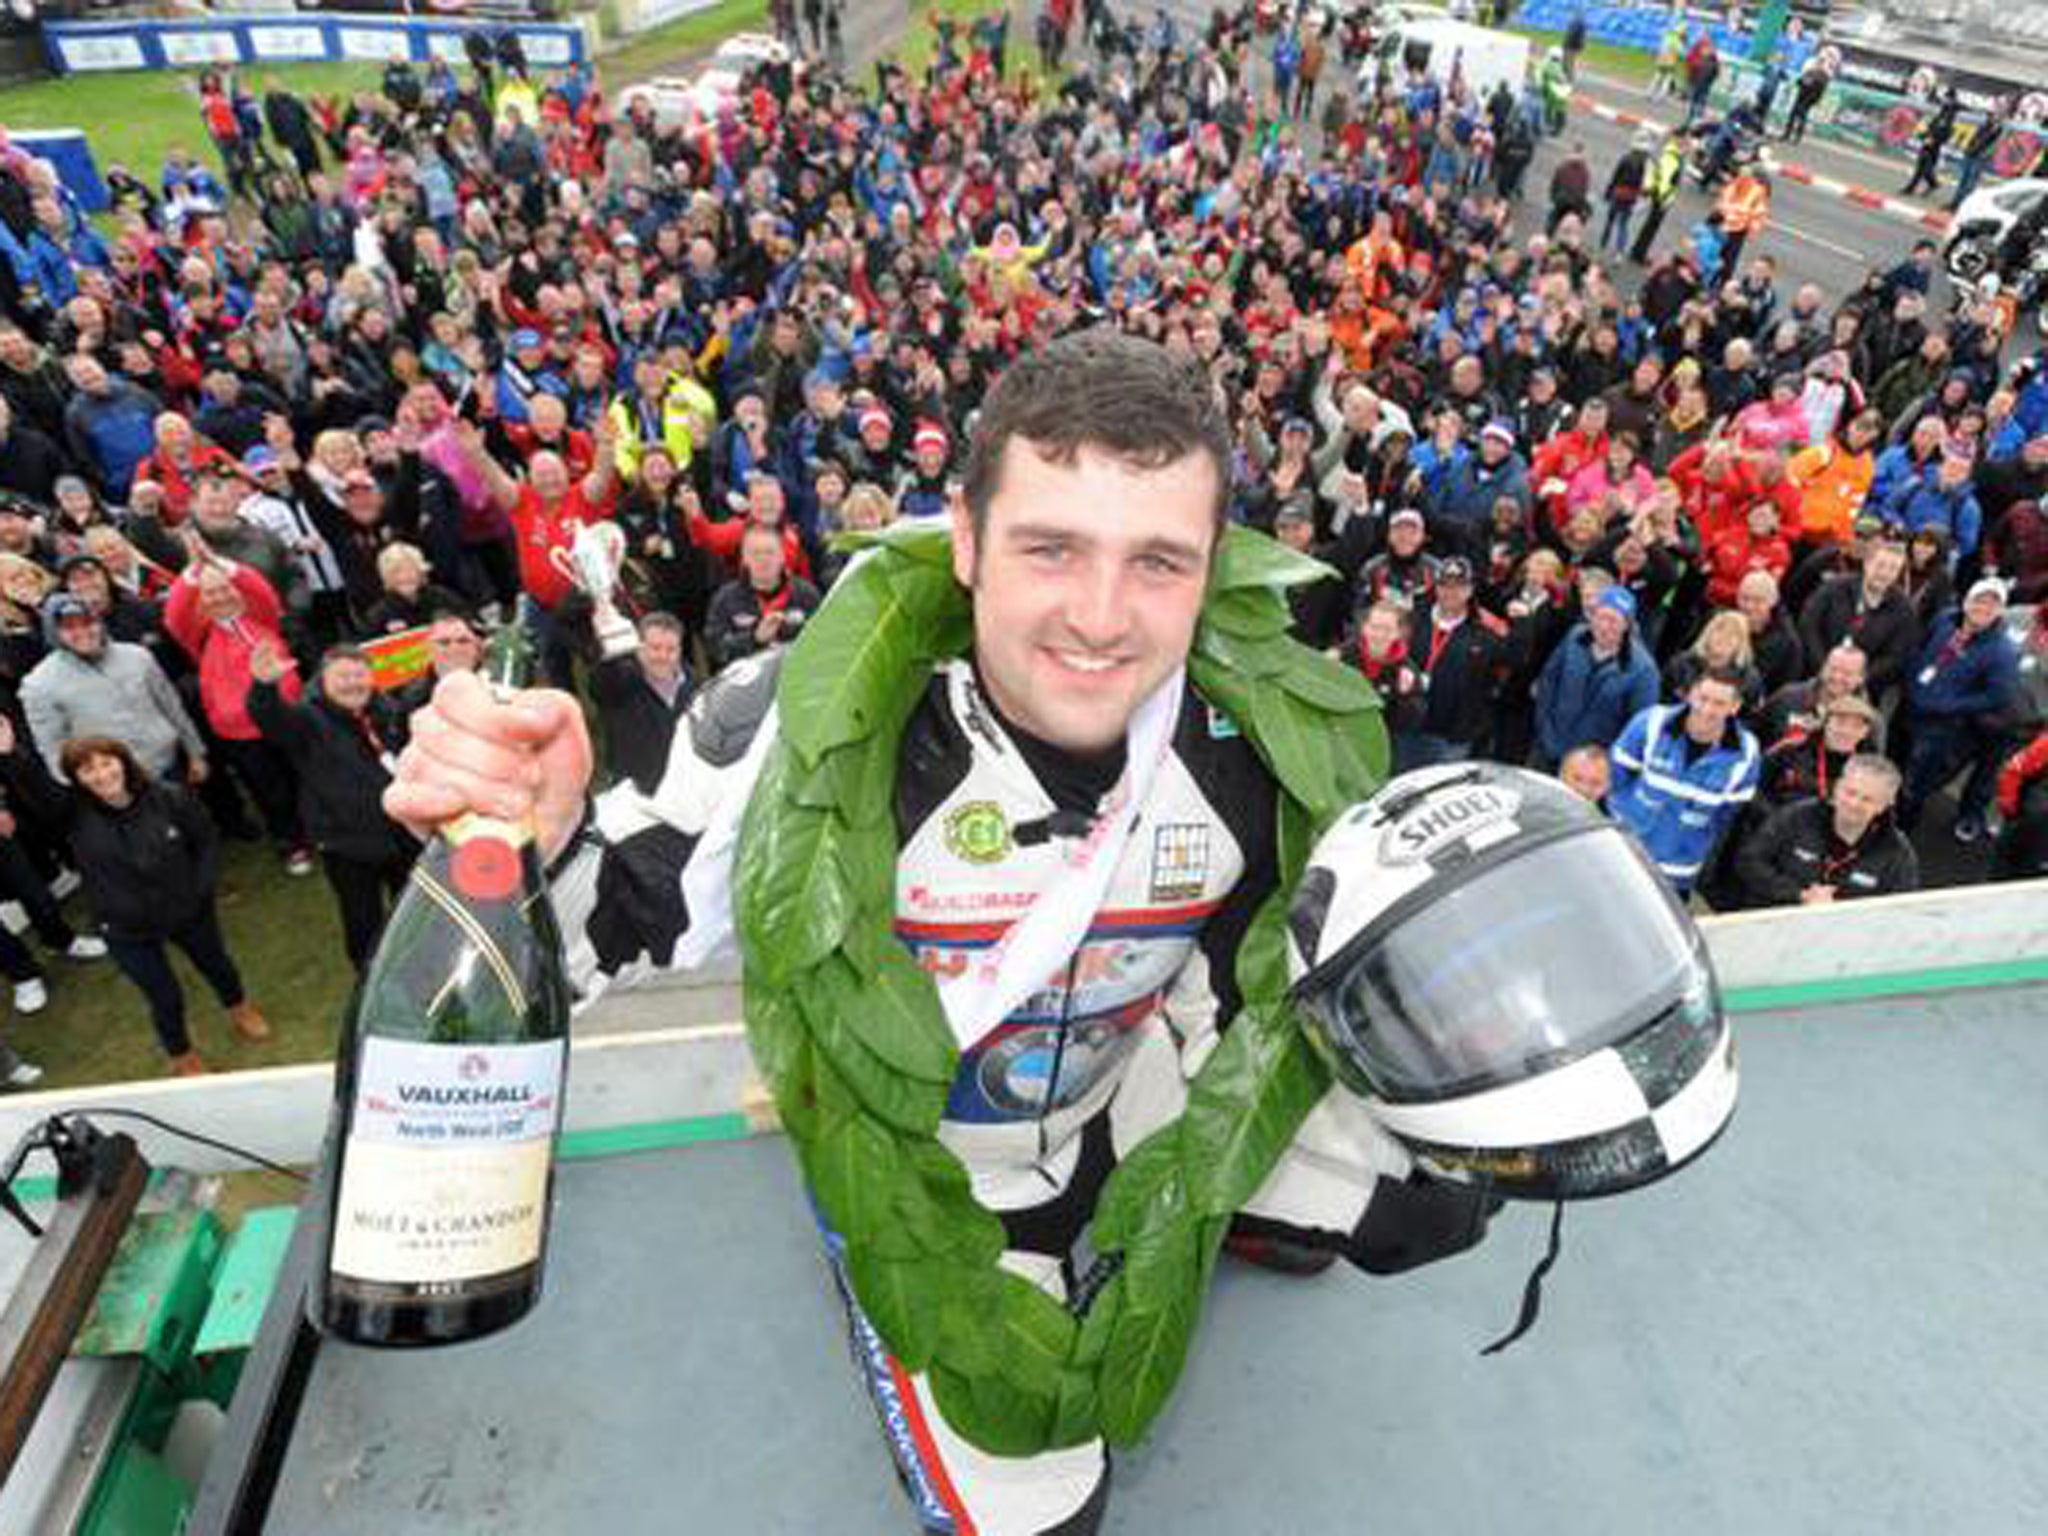 Man of the meeting at the North West 200 Michael Dunlop